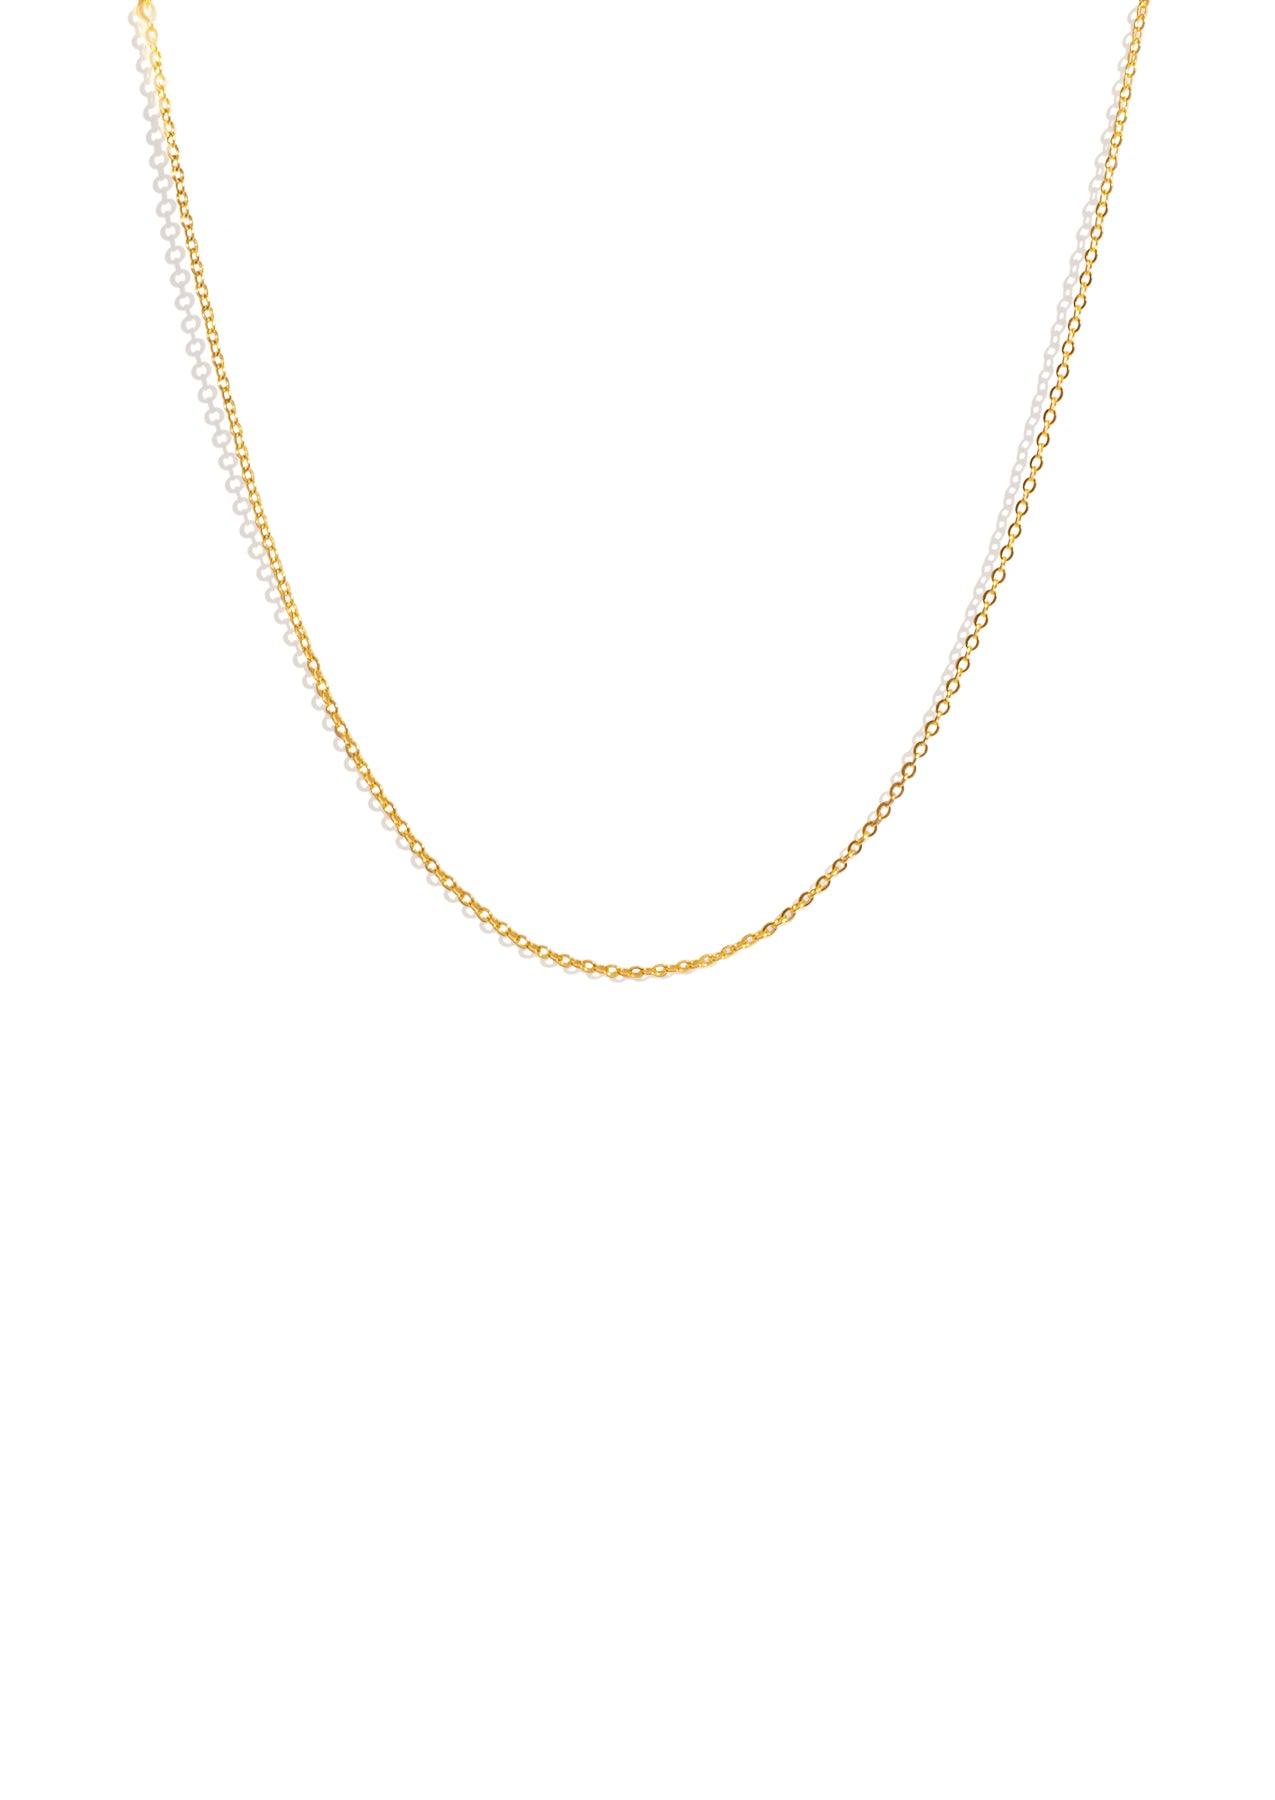 The Gold Twinkle Necklace - Molten Store